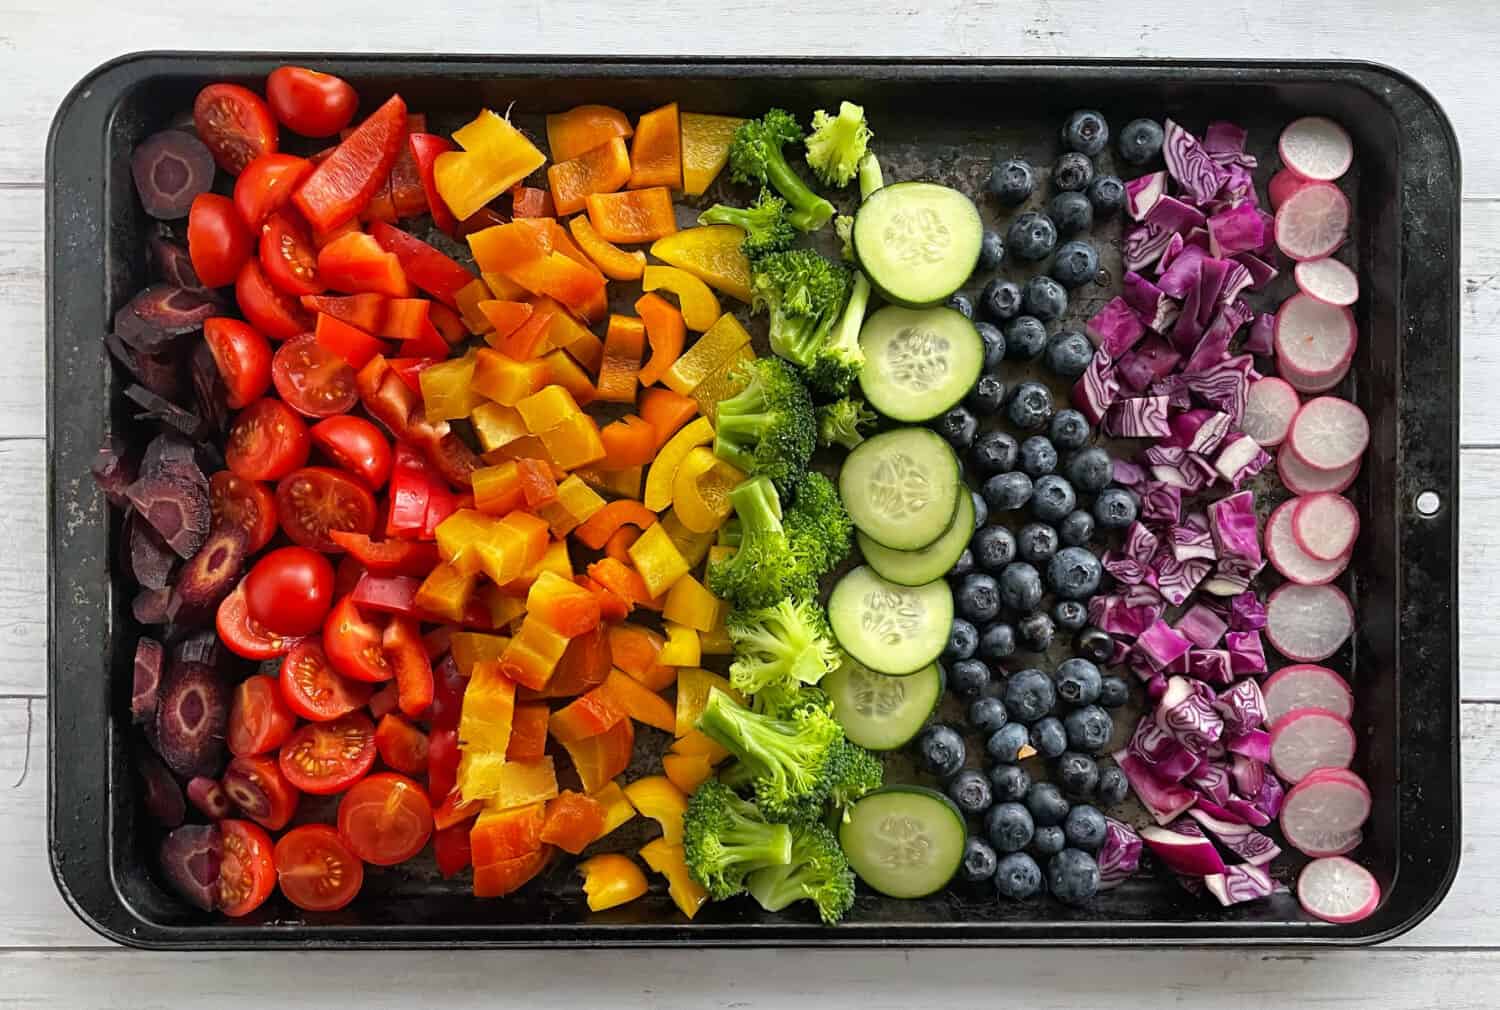 cut vegetables on a baking sheet in rainbow order including purple carrots, tomatoes, red pepper, chickpeas, orange and yellow pepper, broccoli, blueberries, red onion, and radishes.